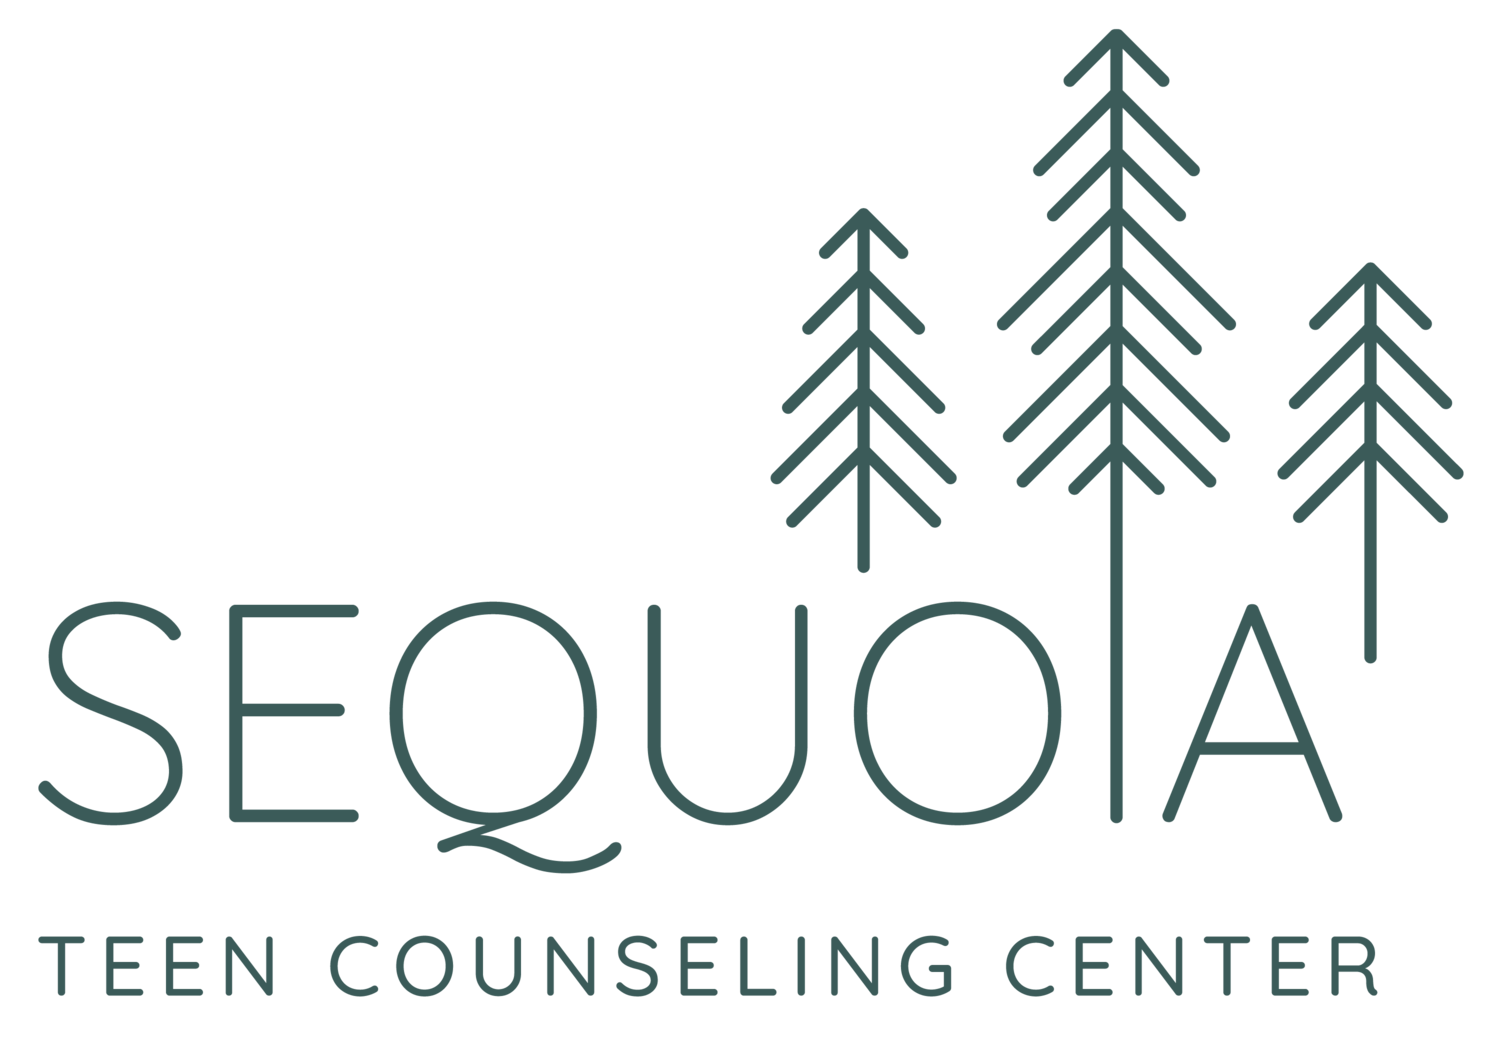 Sequoia Teen Counseling